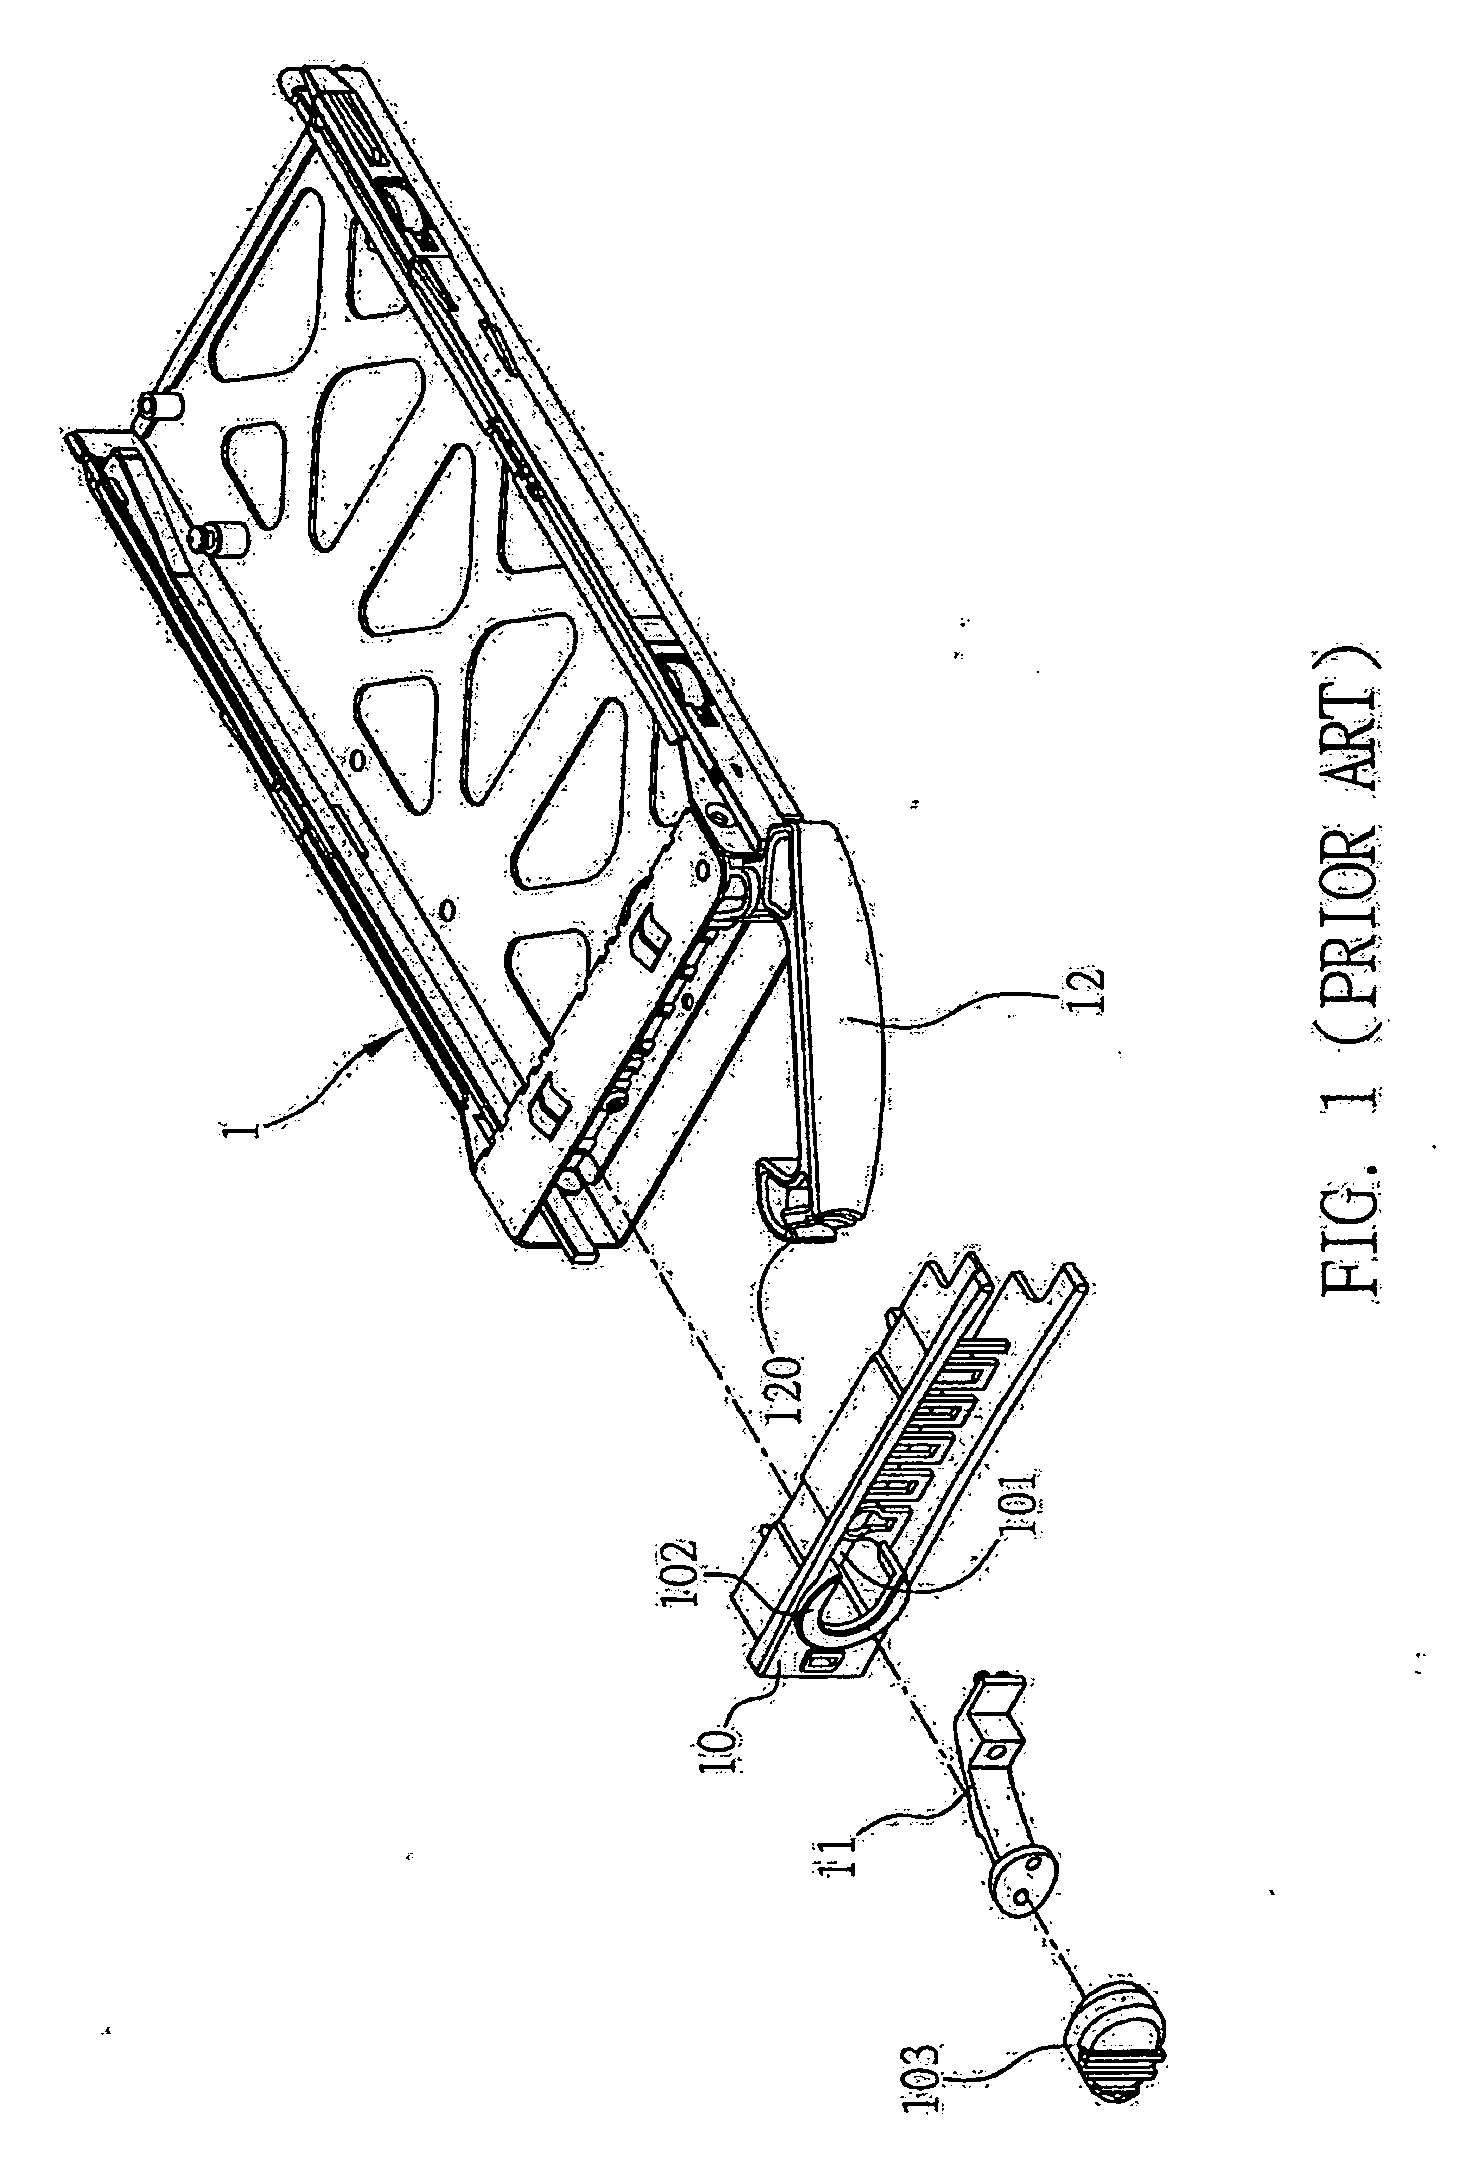 Removable device